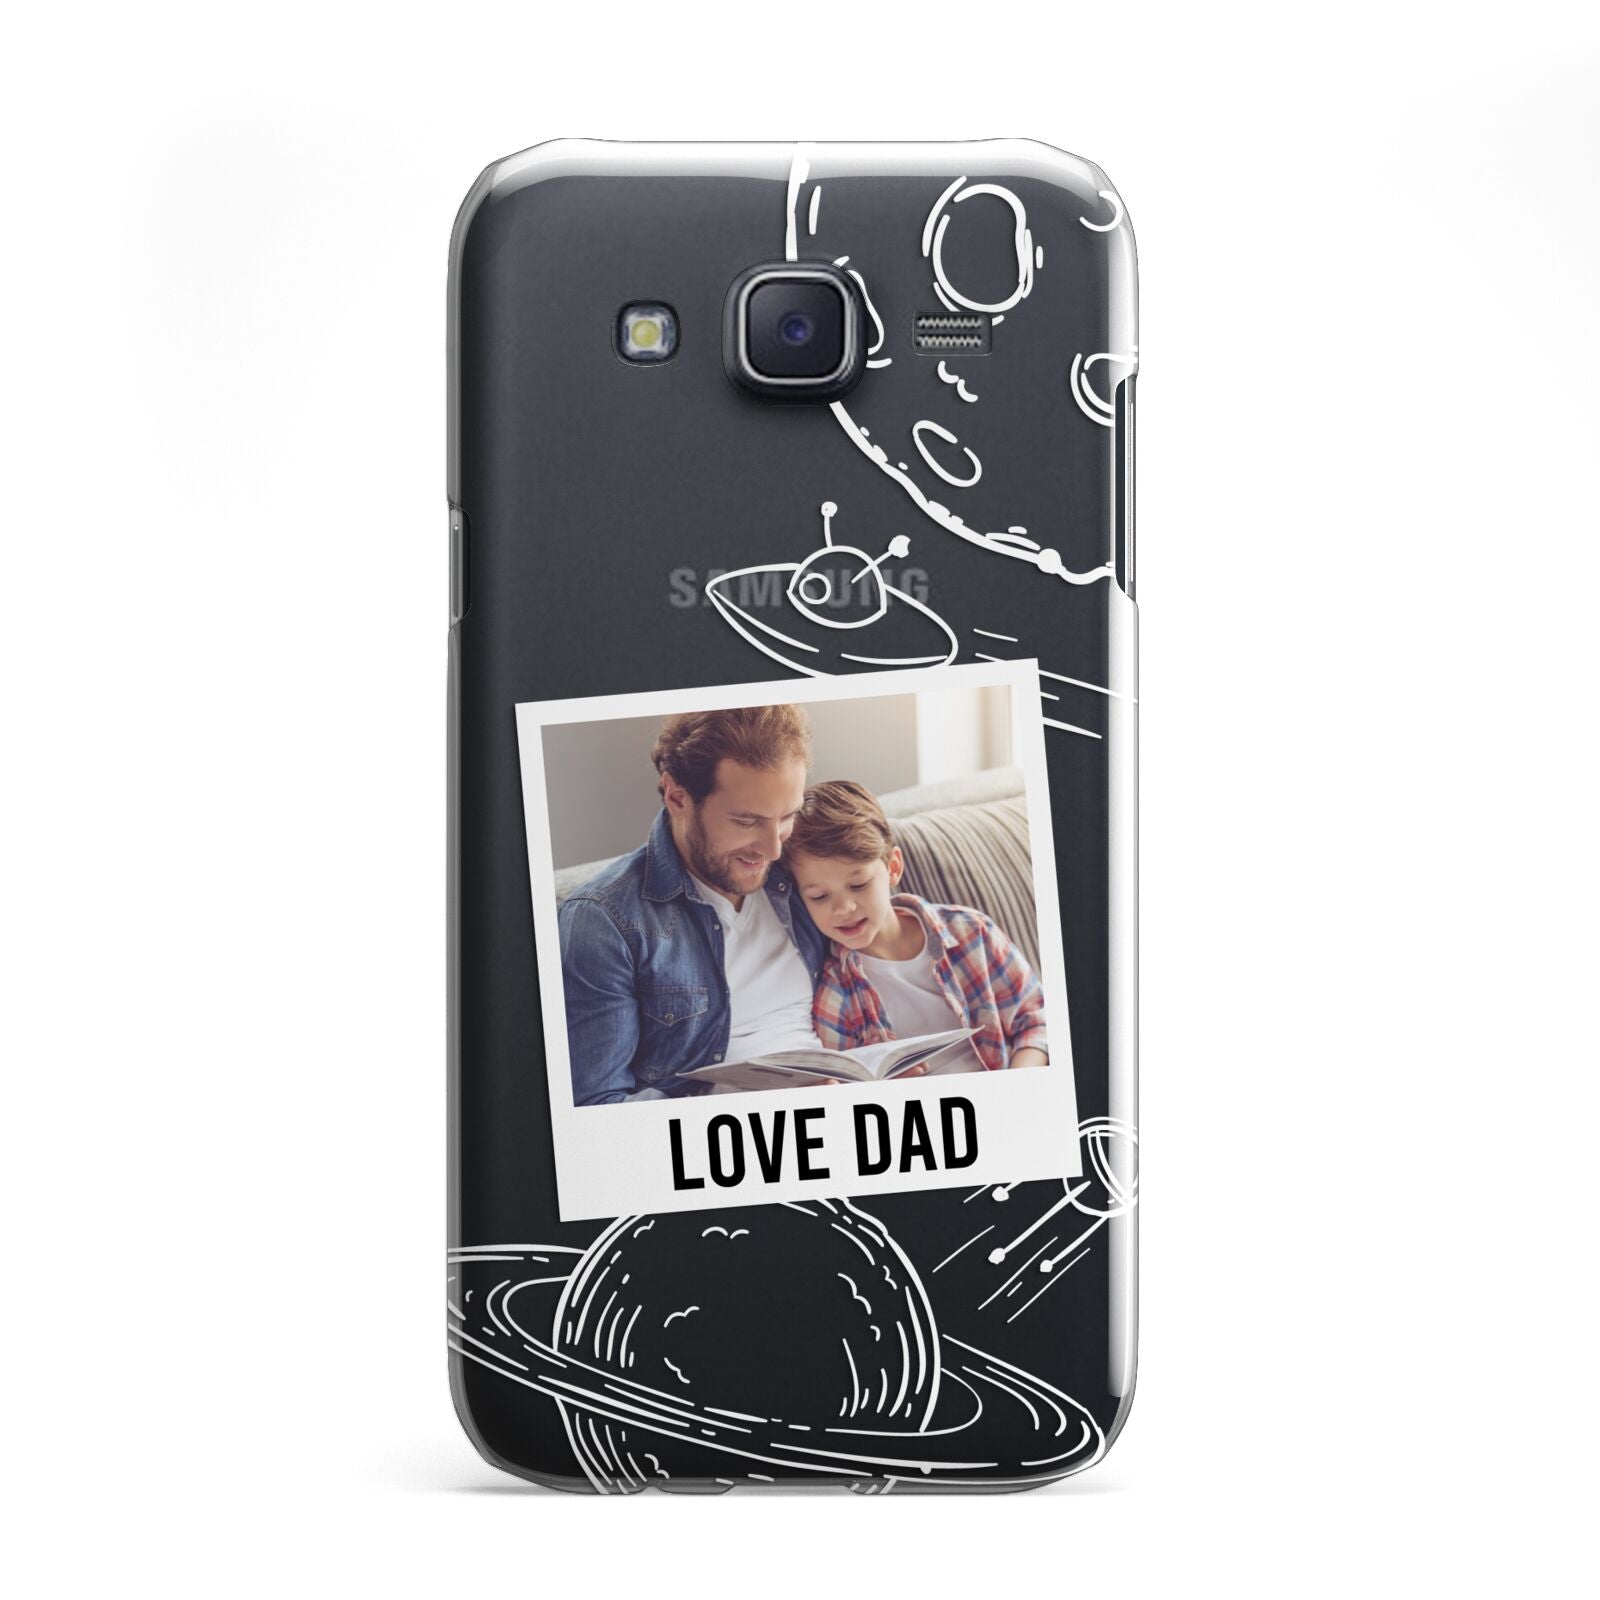 Personalised From Dad Photo Samsung Galaxy J5 Case